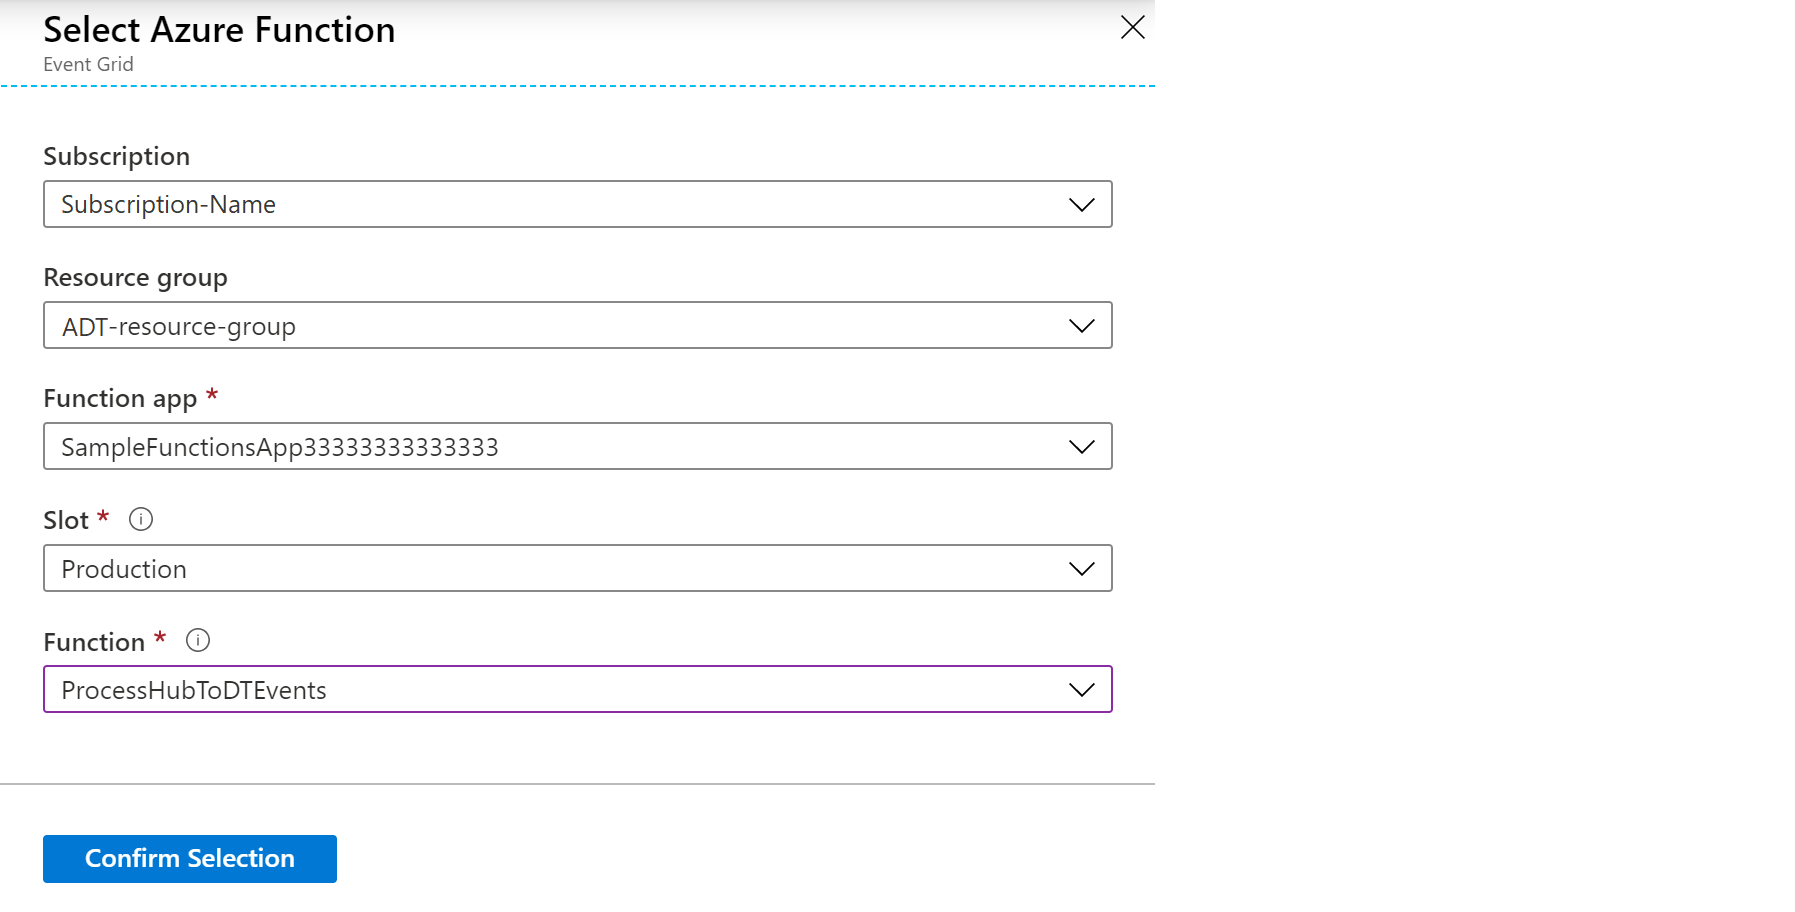 Screenshot of the Azure portal event subscription showing the window to select an Azure function.